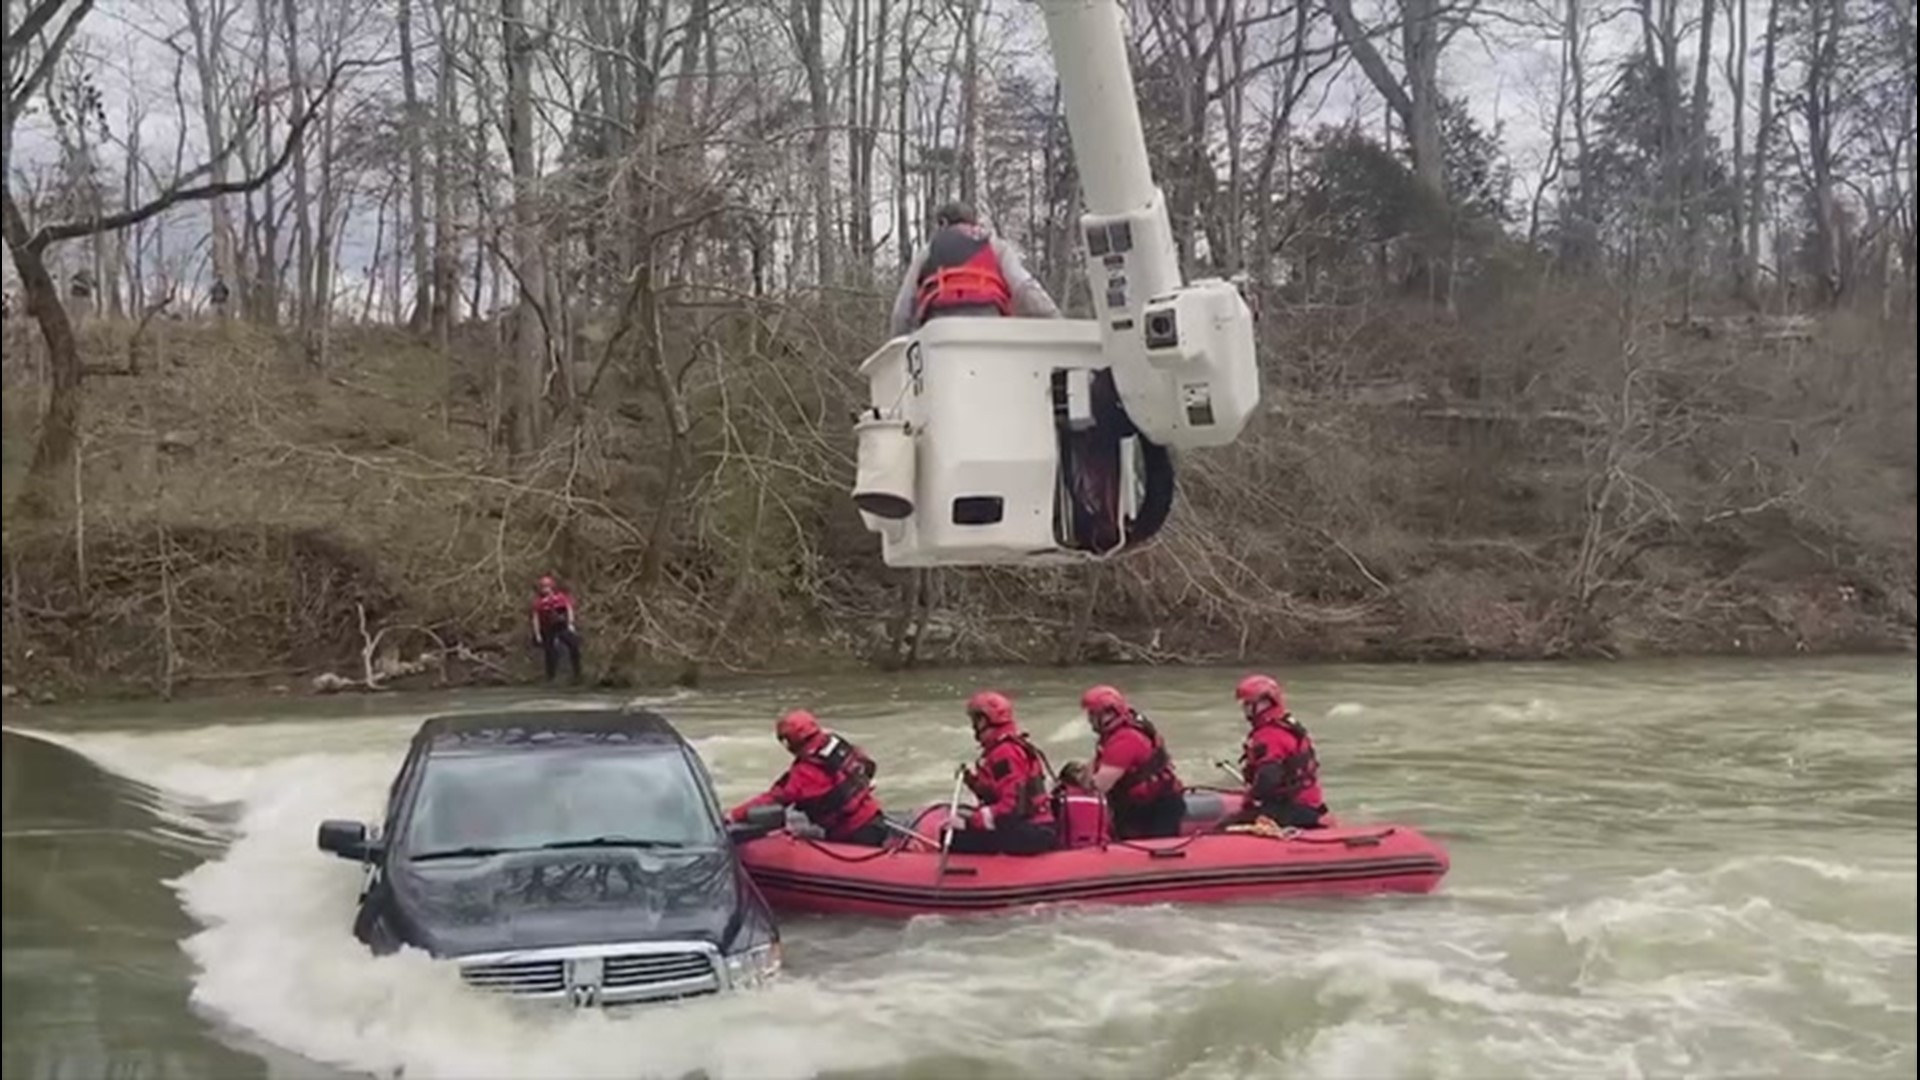 Swift-water rescue teams, with the help of bucket trucks from local phone and electric companies, saved a family, including an infant, from a partially submerged vehicle near Liberty, Tennessee.